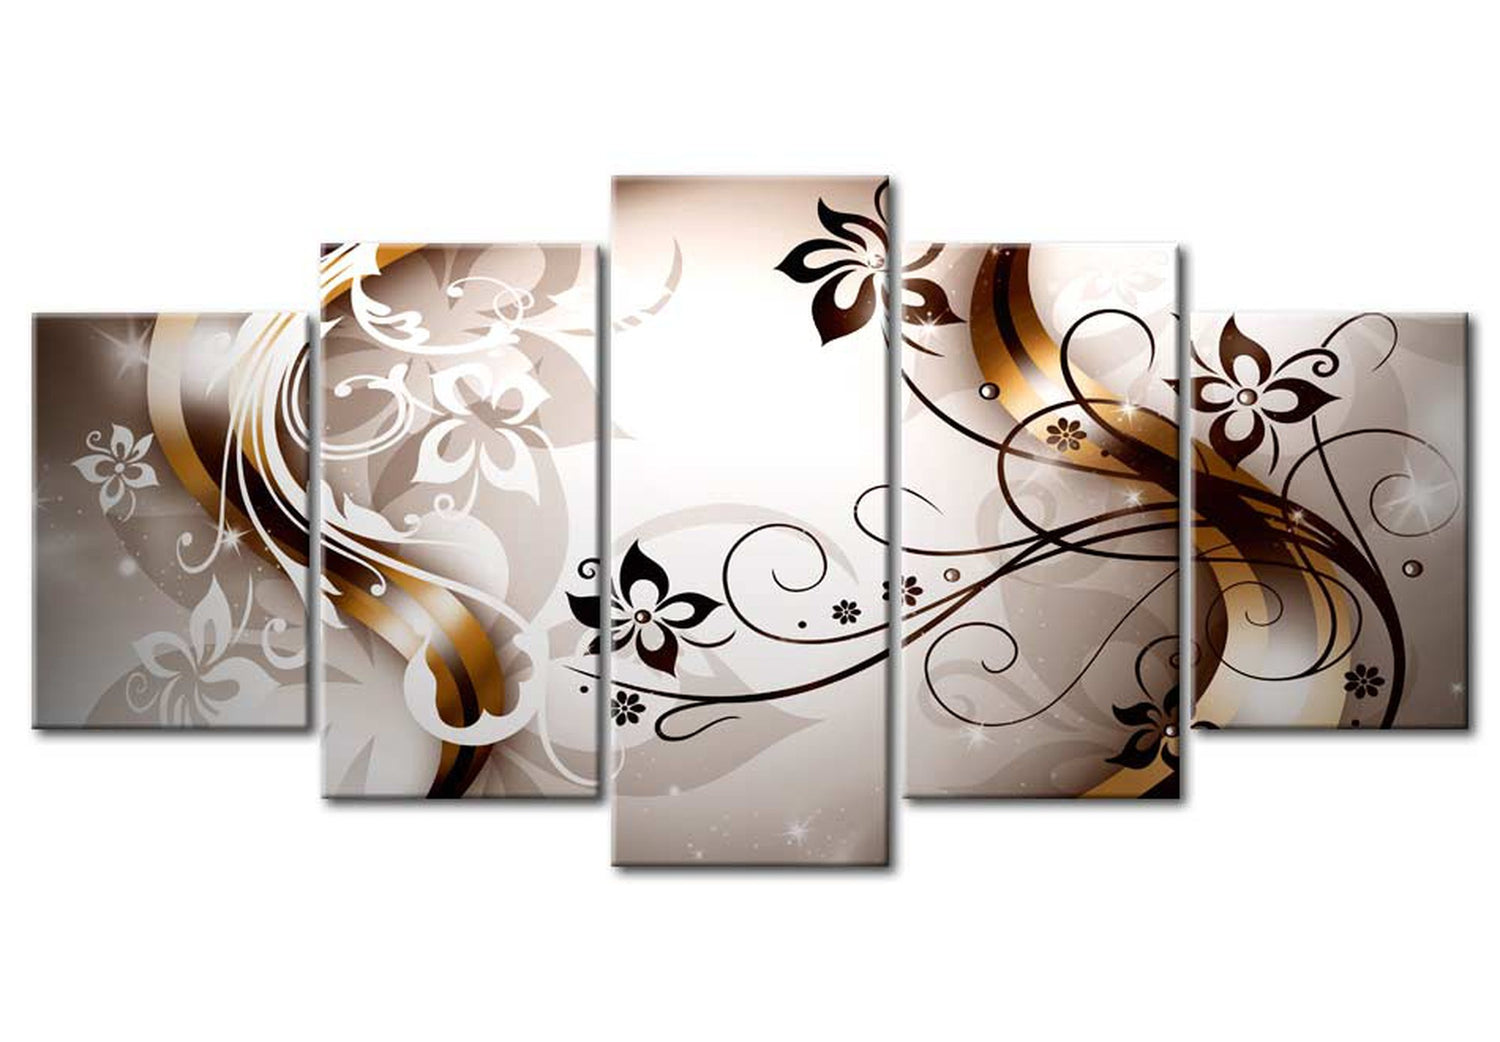 Glam Canvas Wall Art - Brown Delicacy - 5 Pieces